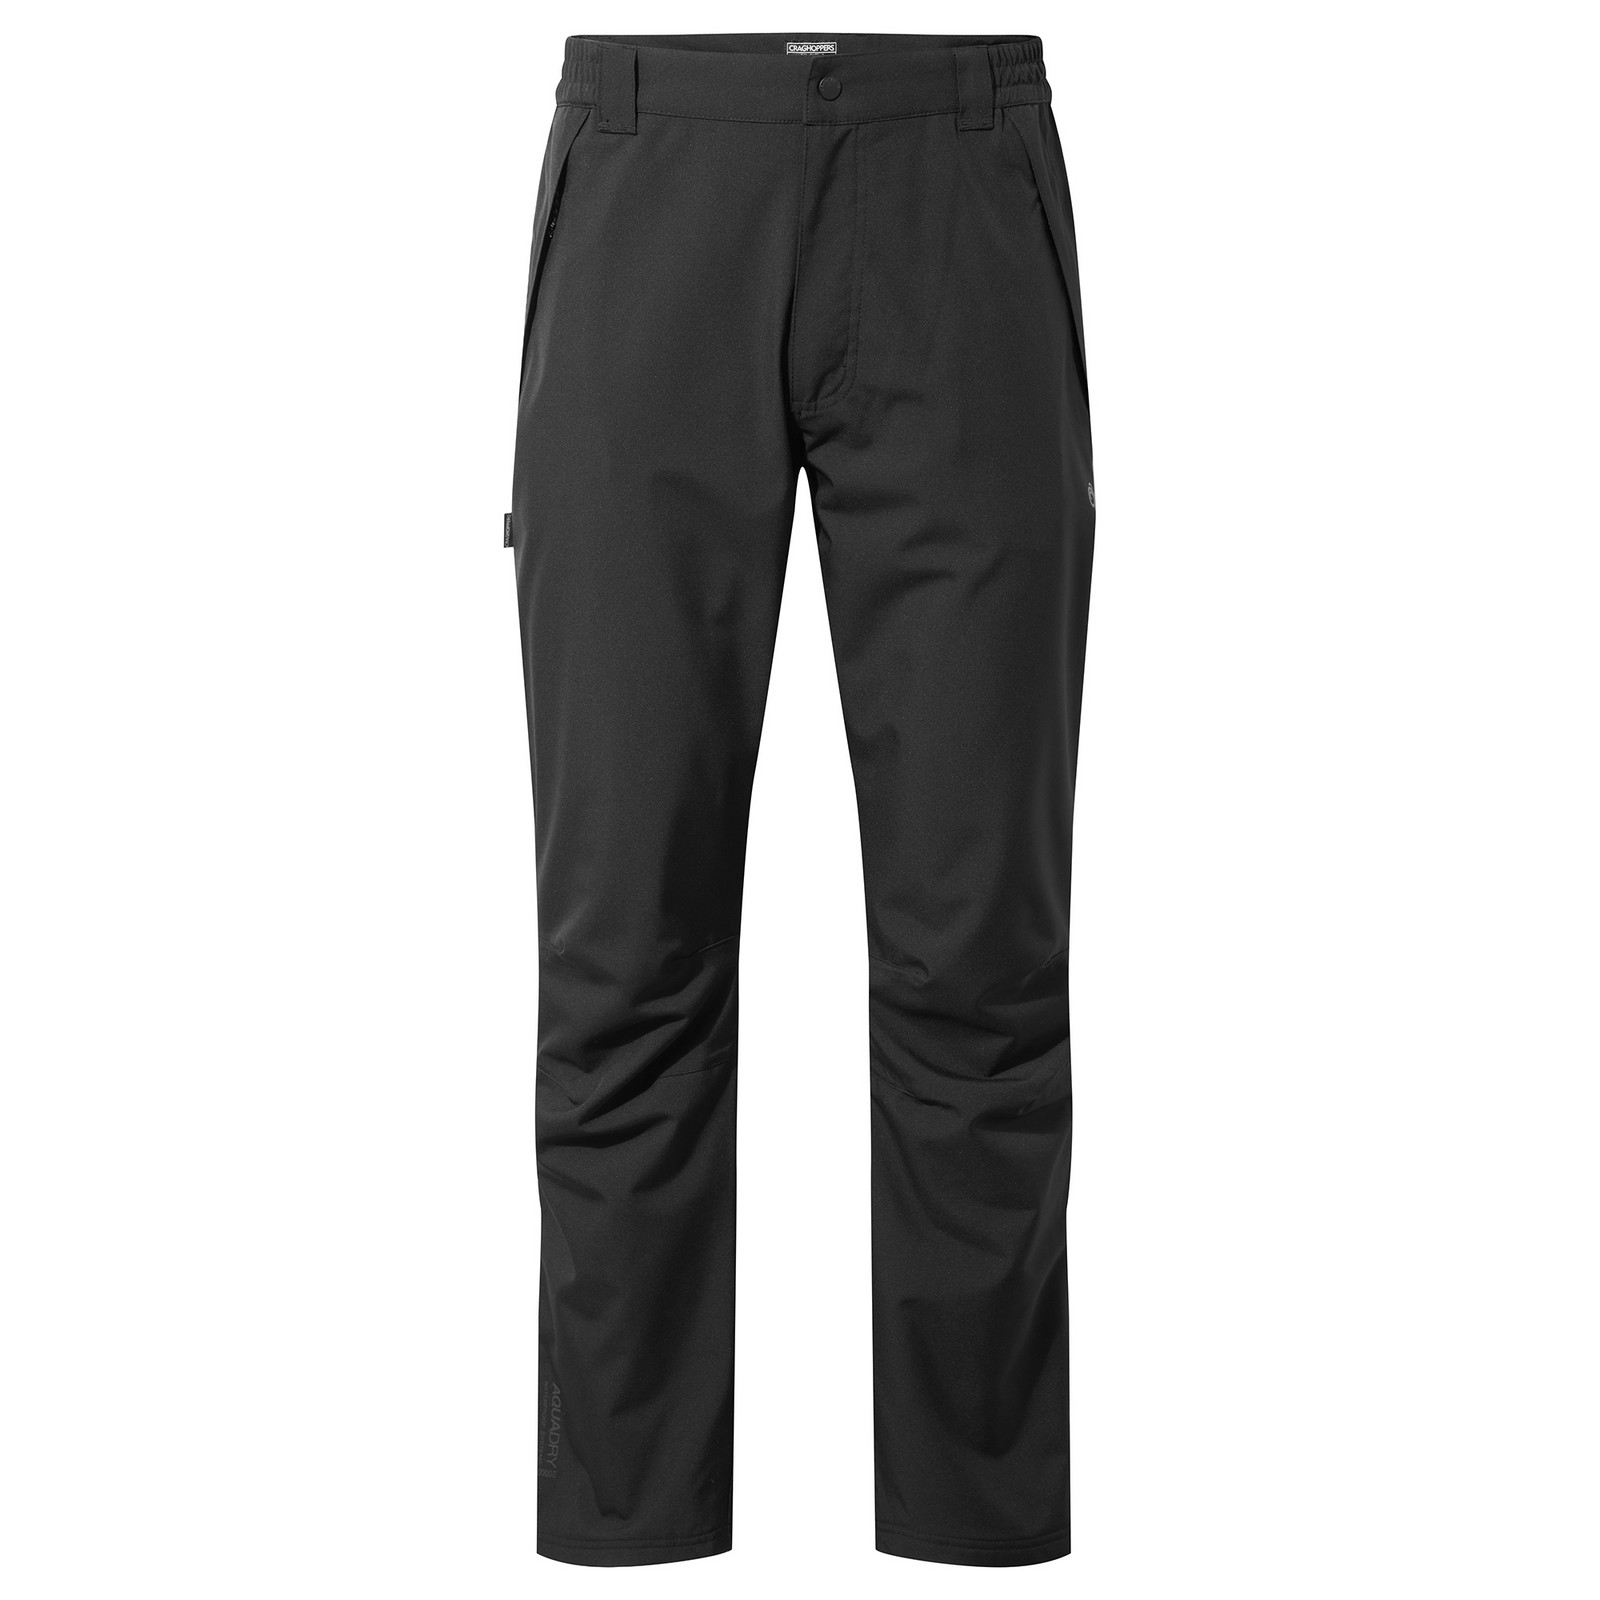 Craghoppers Kiwi waterproof thermo trousers | WISE Worksafe